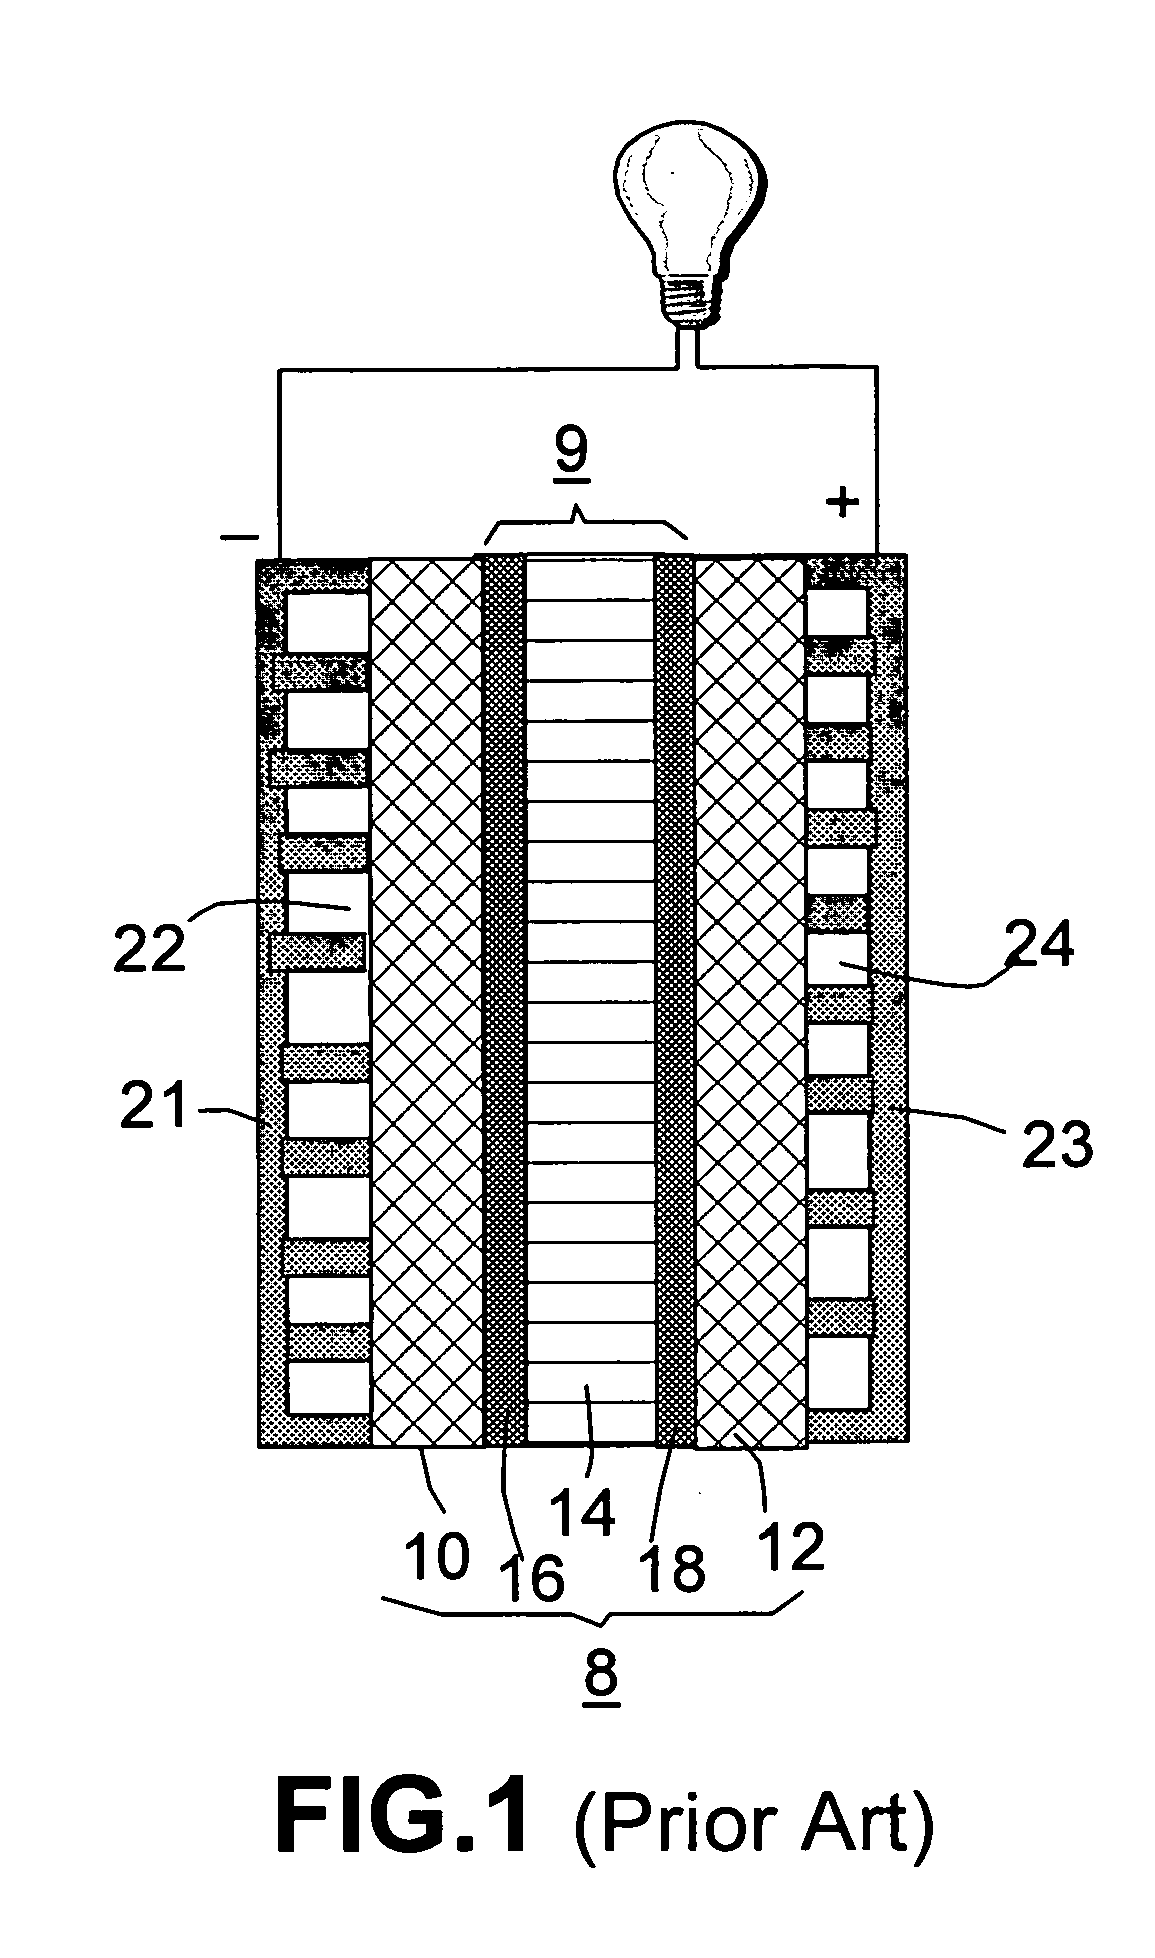 Highly conductive composites for fuel cell flow field plates and bipolar plates